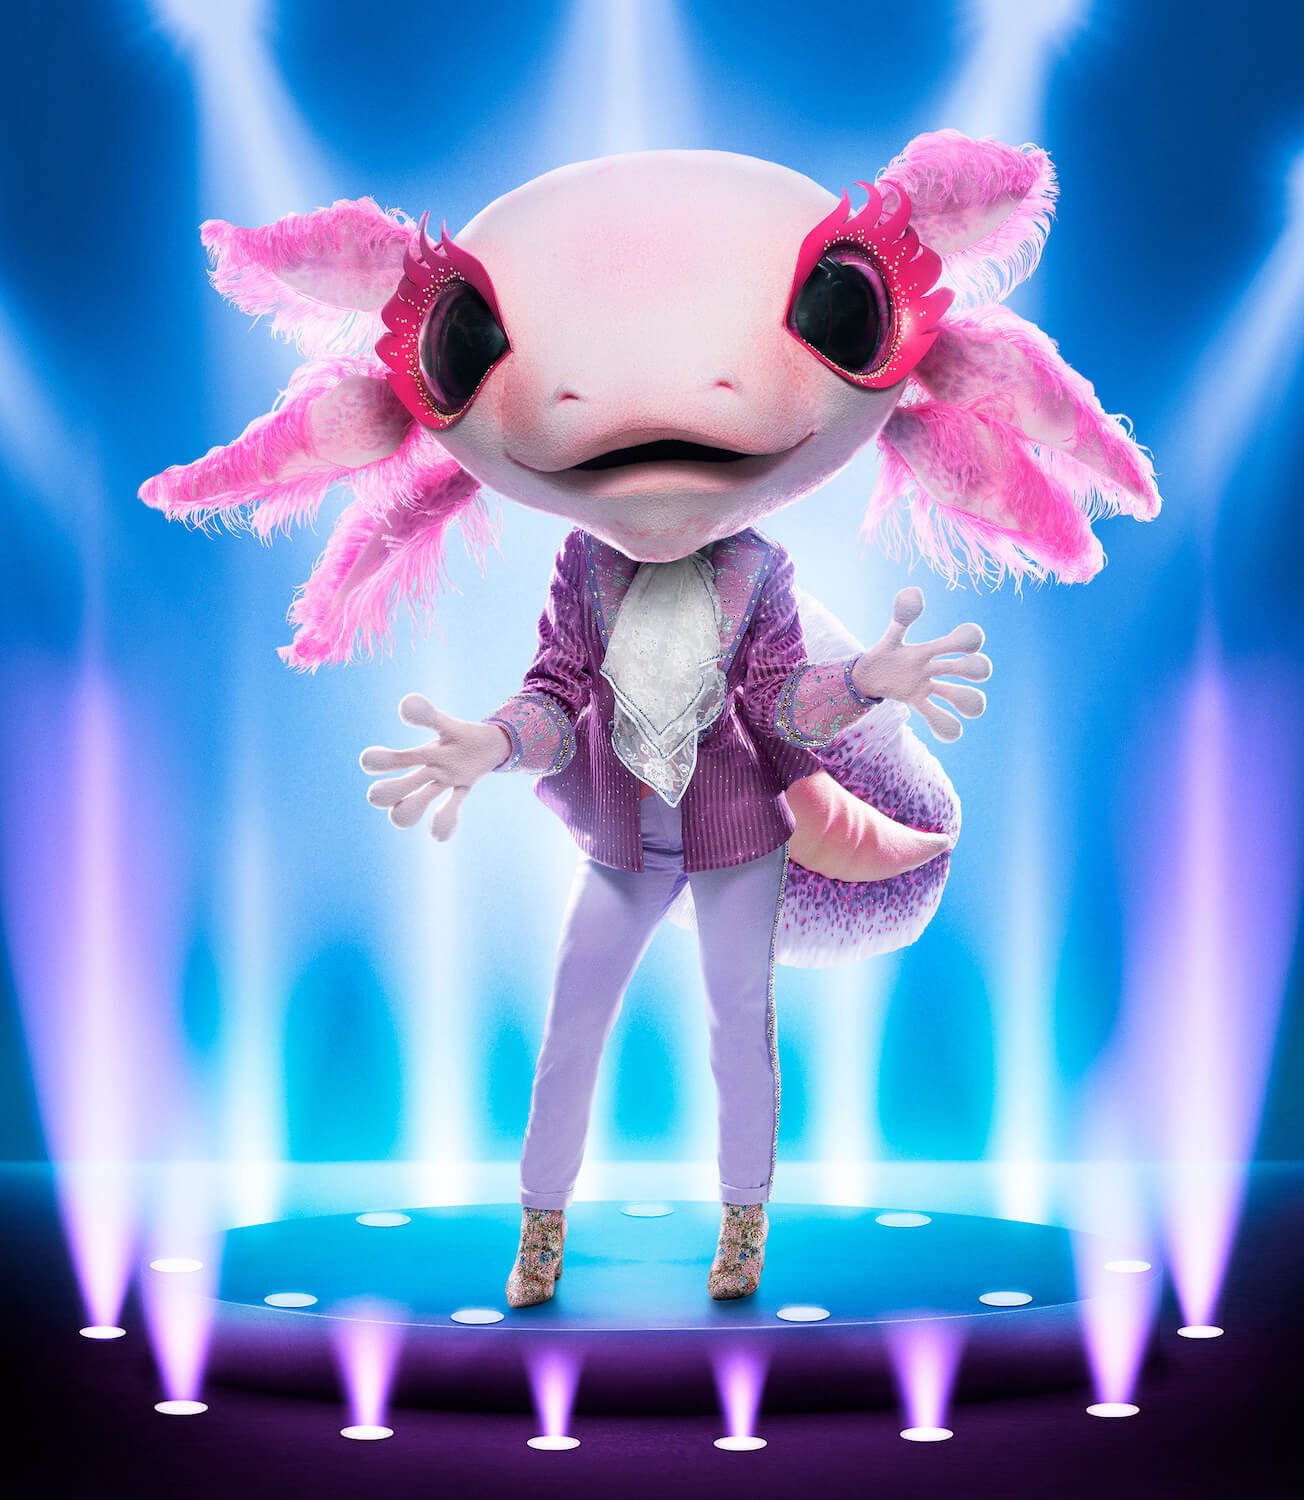 Axolotl on stage in 'The Masked Singer' Season 9 